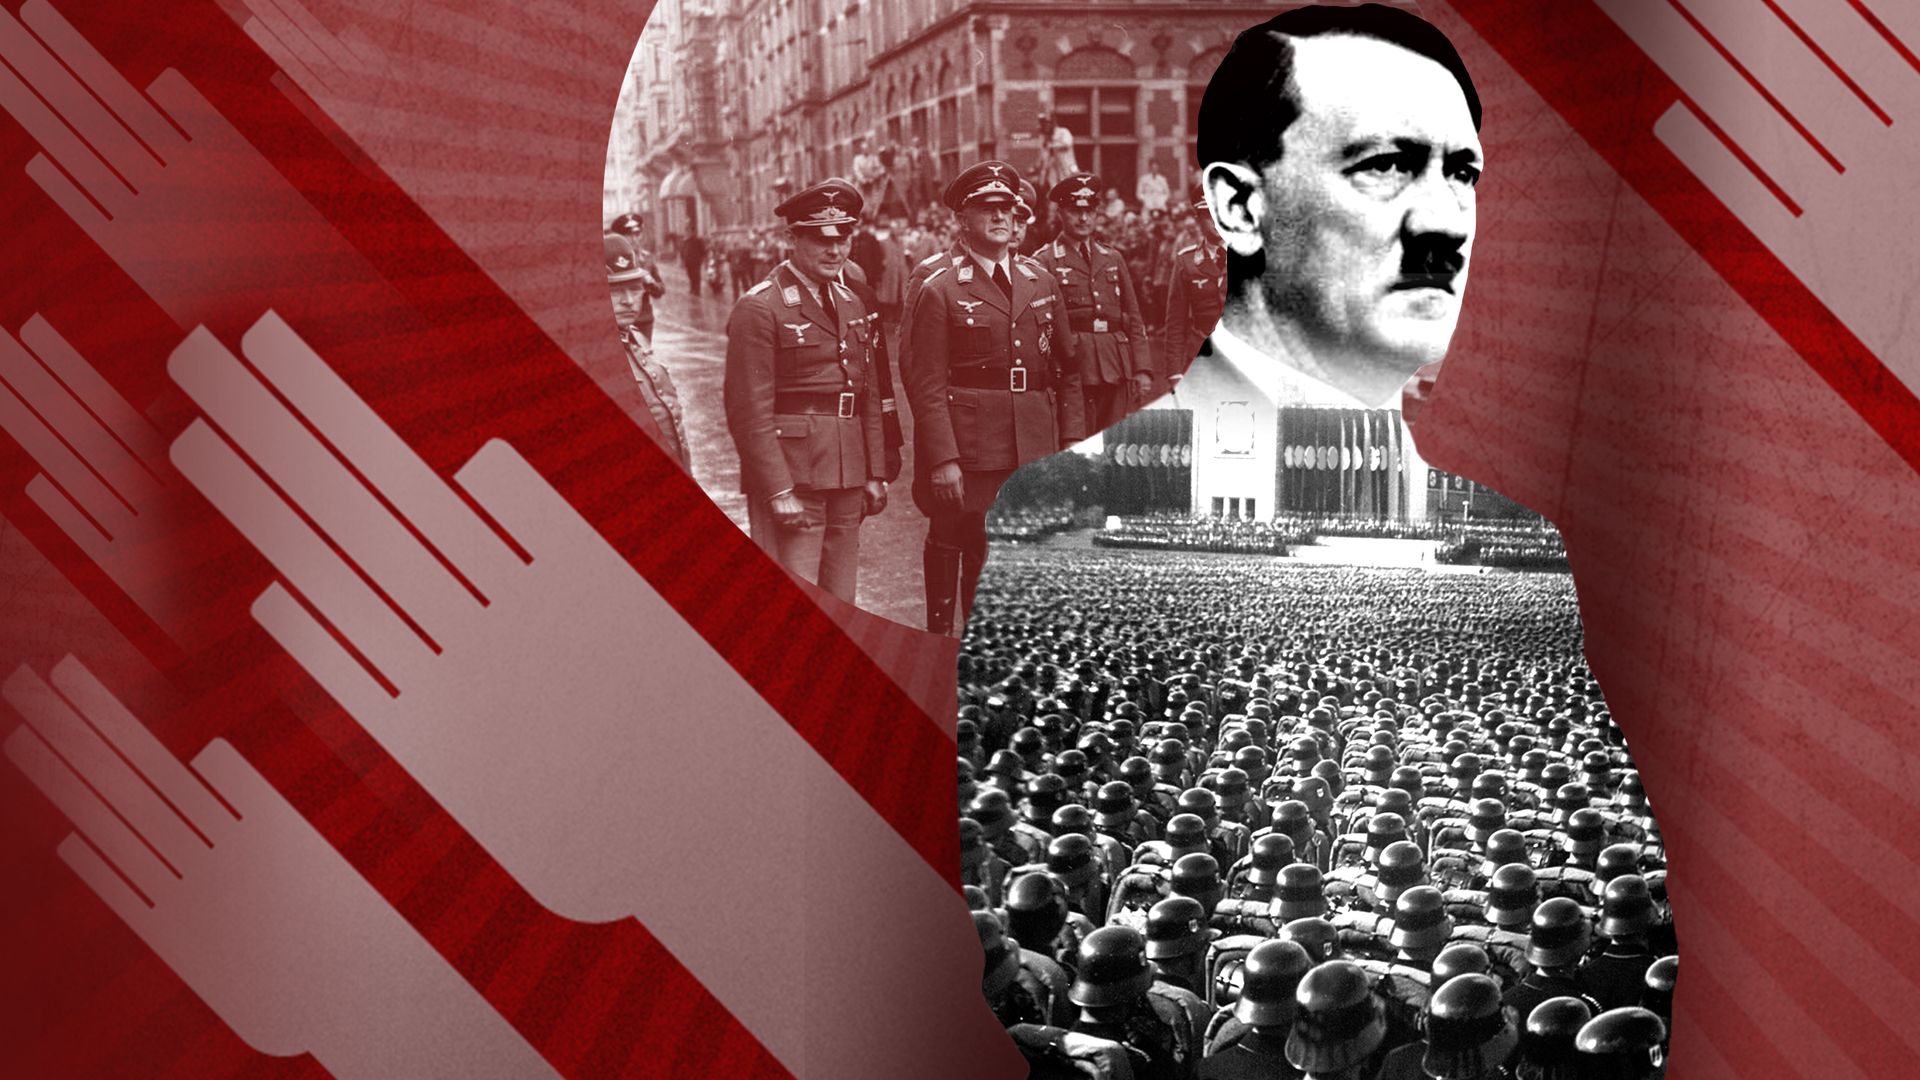 Hitler's People: A Portrait of the Third Reich